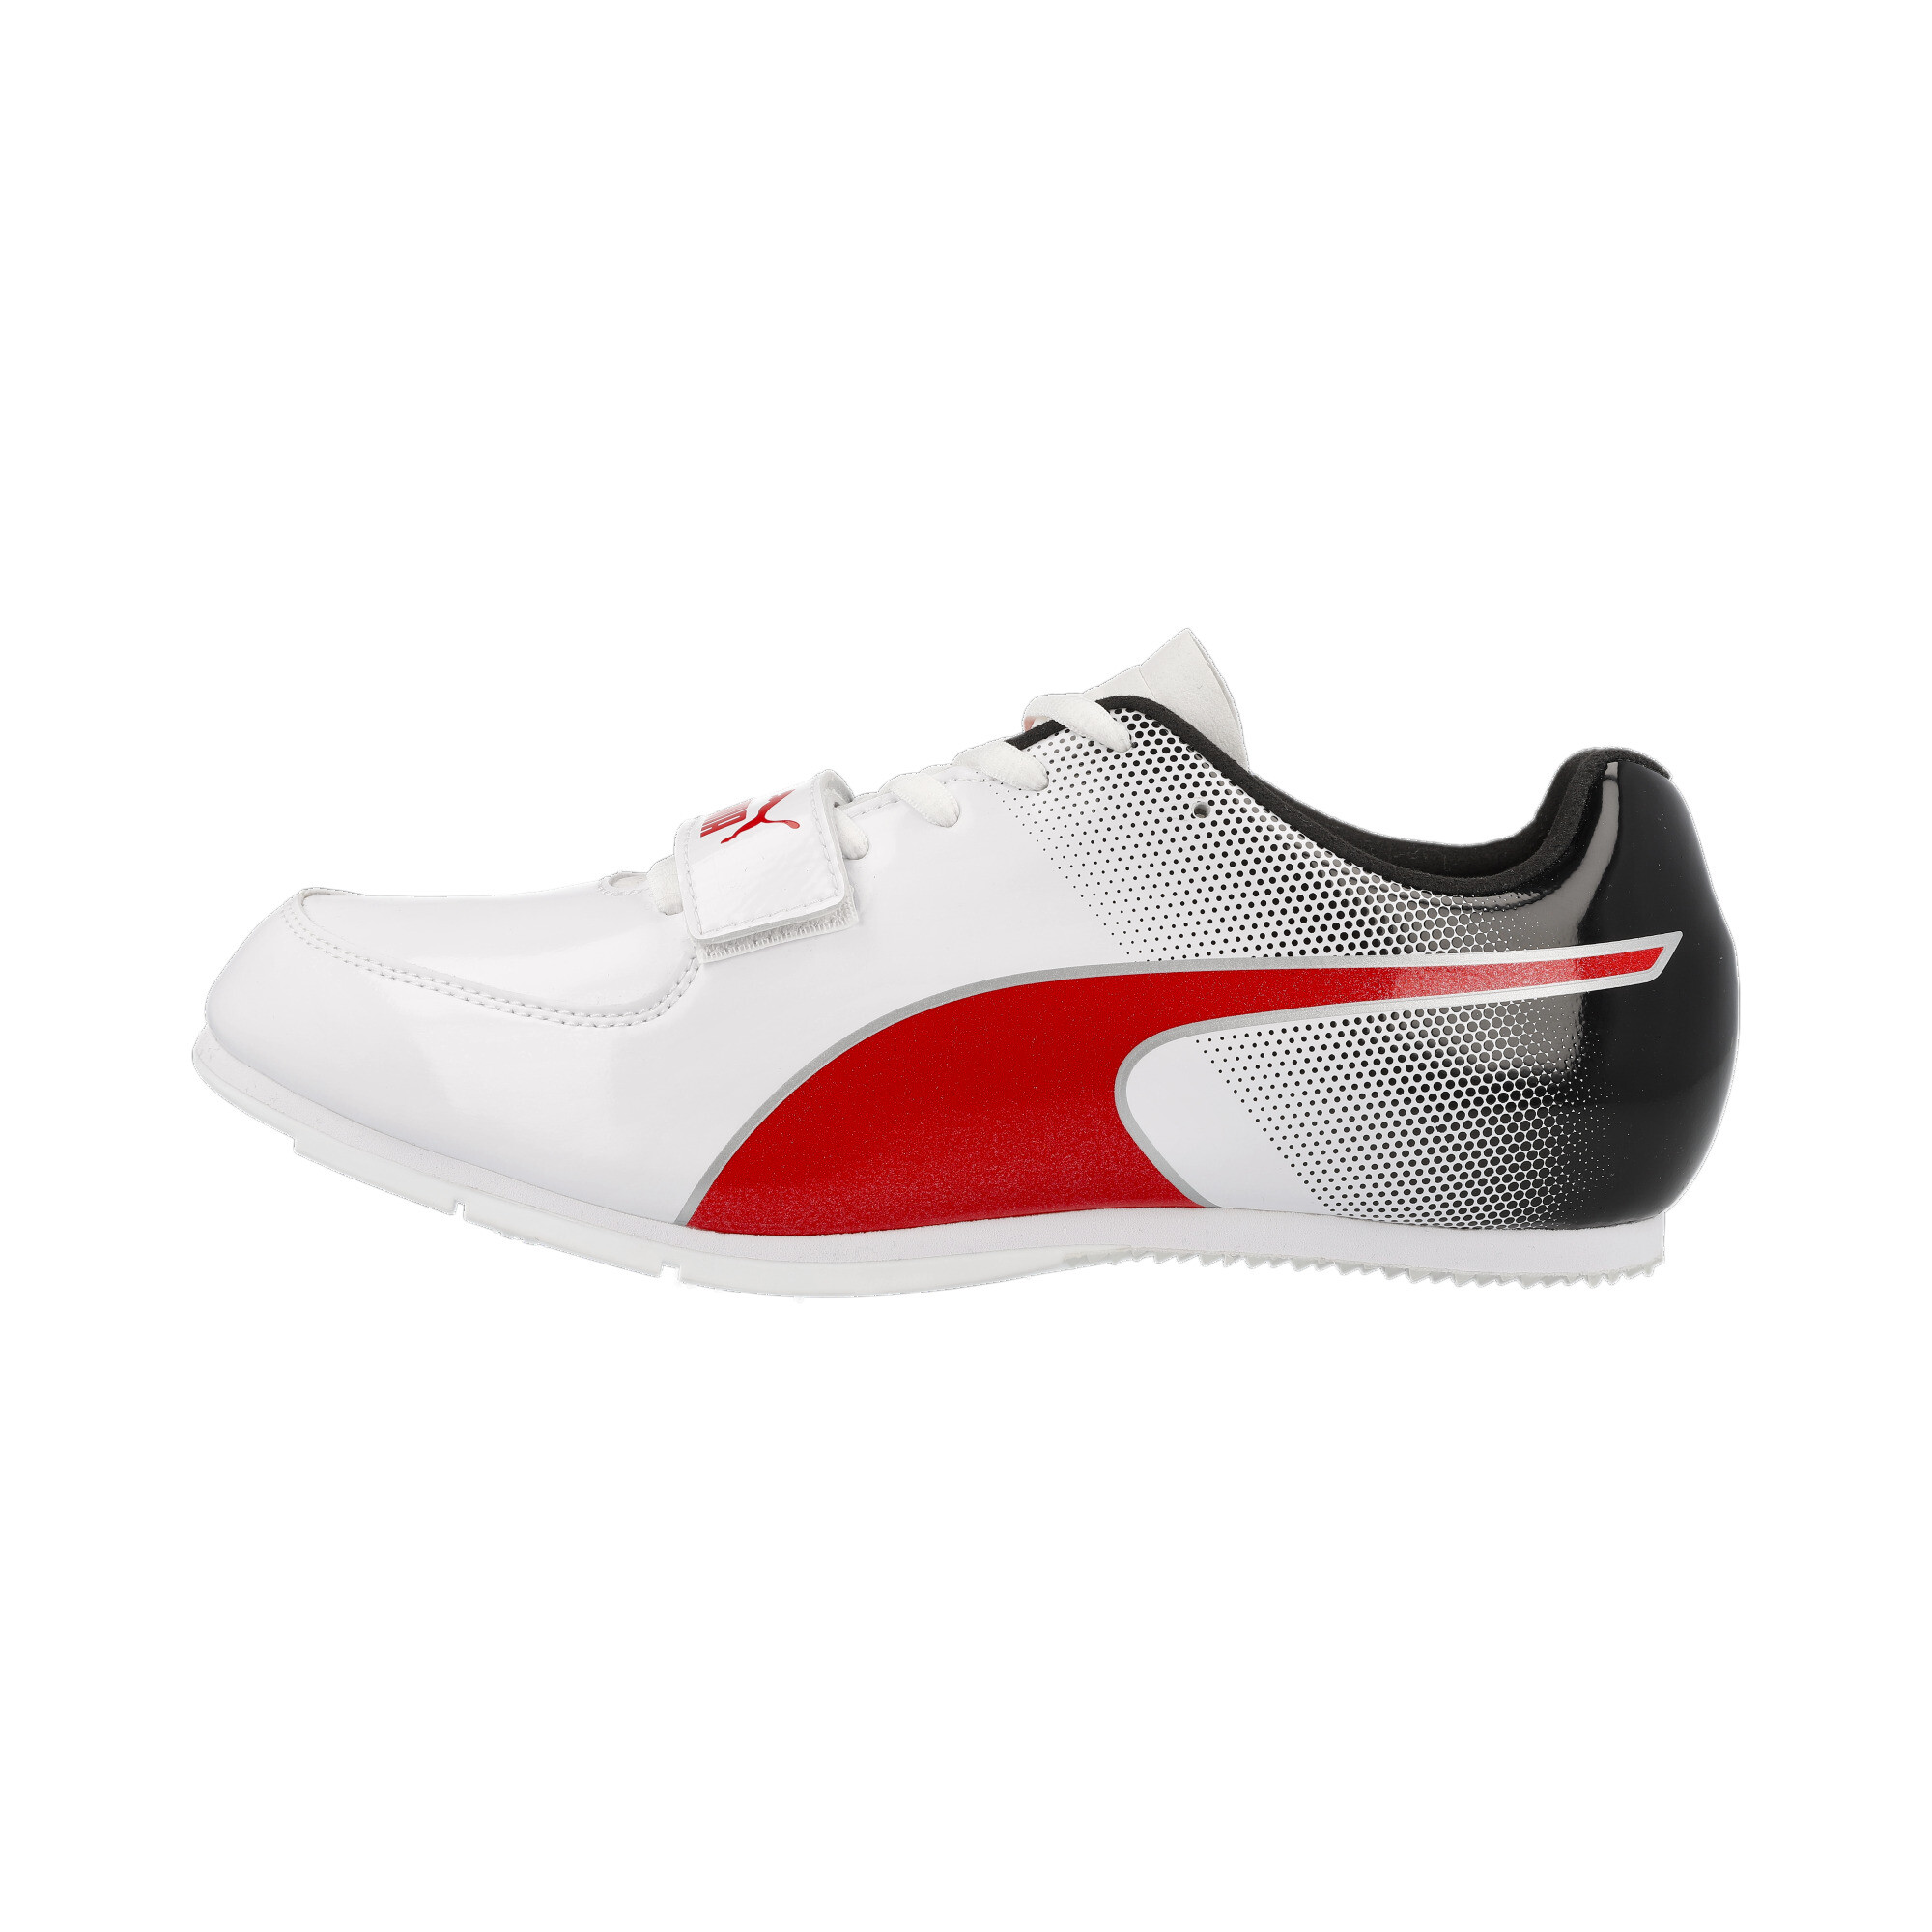 Puma Evo SPEED Long Jump 10 Track And Field Shoes, White, Size 41, Shoes